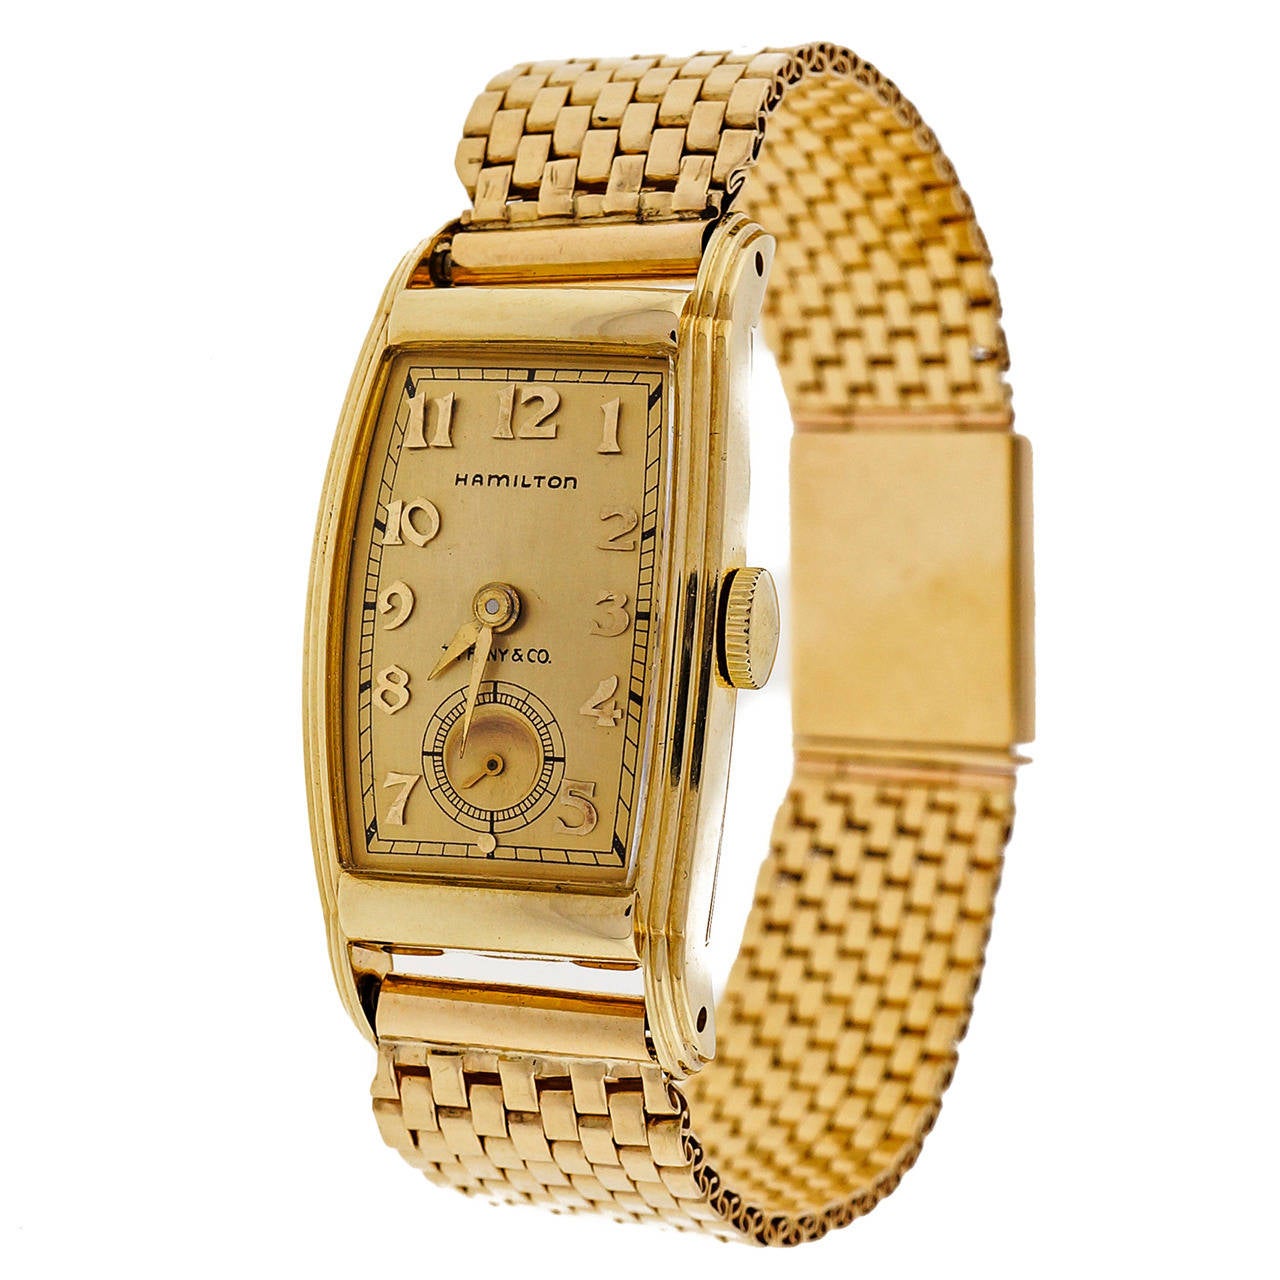 Hamilton Yellow Gold Tonneau Wristwatch Retailed by Tiffany and Co ...